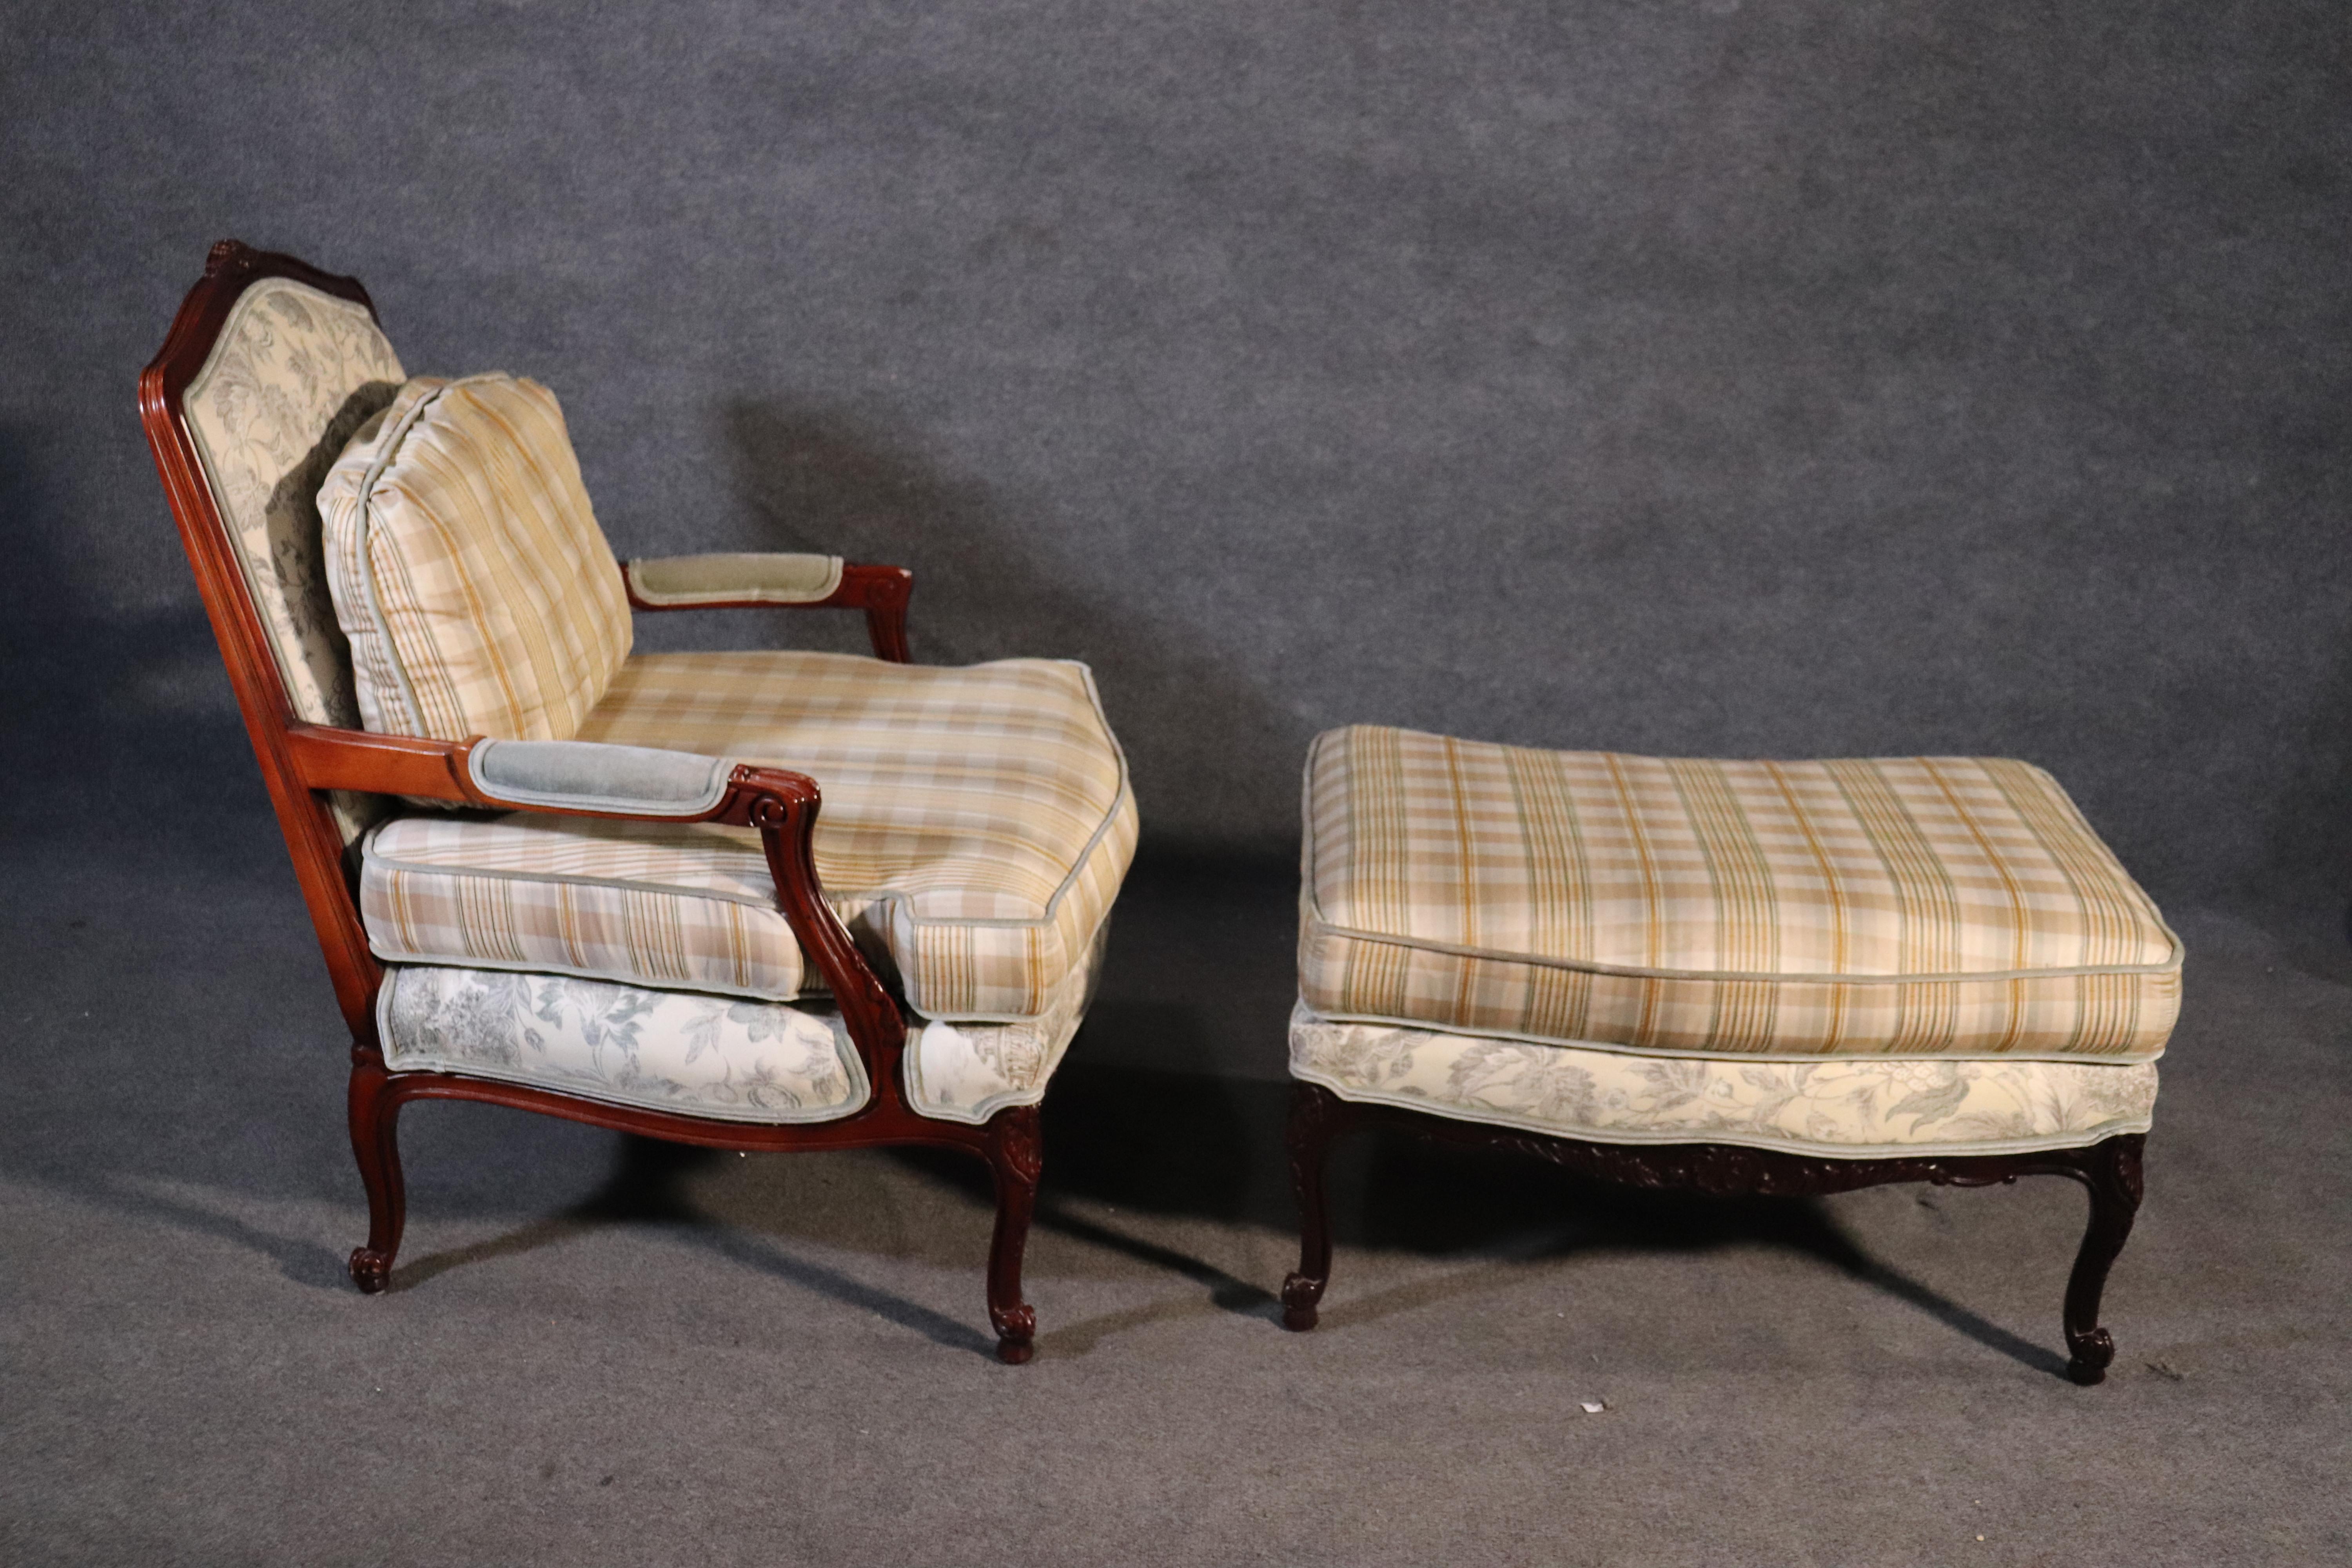 This is a beautiful custom made chair and ottoman made by Taylor-King of North Carolina. The chair is in very good condition with minimal signs of use at all. The upholstery is extremely attractive toile and gingham printed fabric. The chair